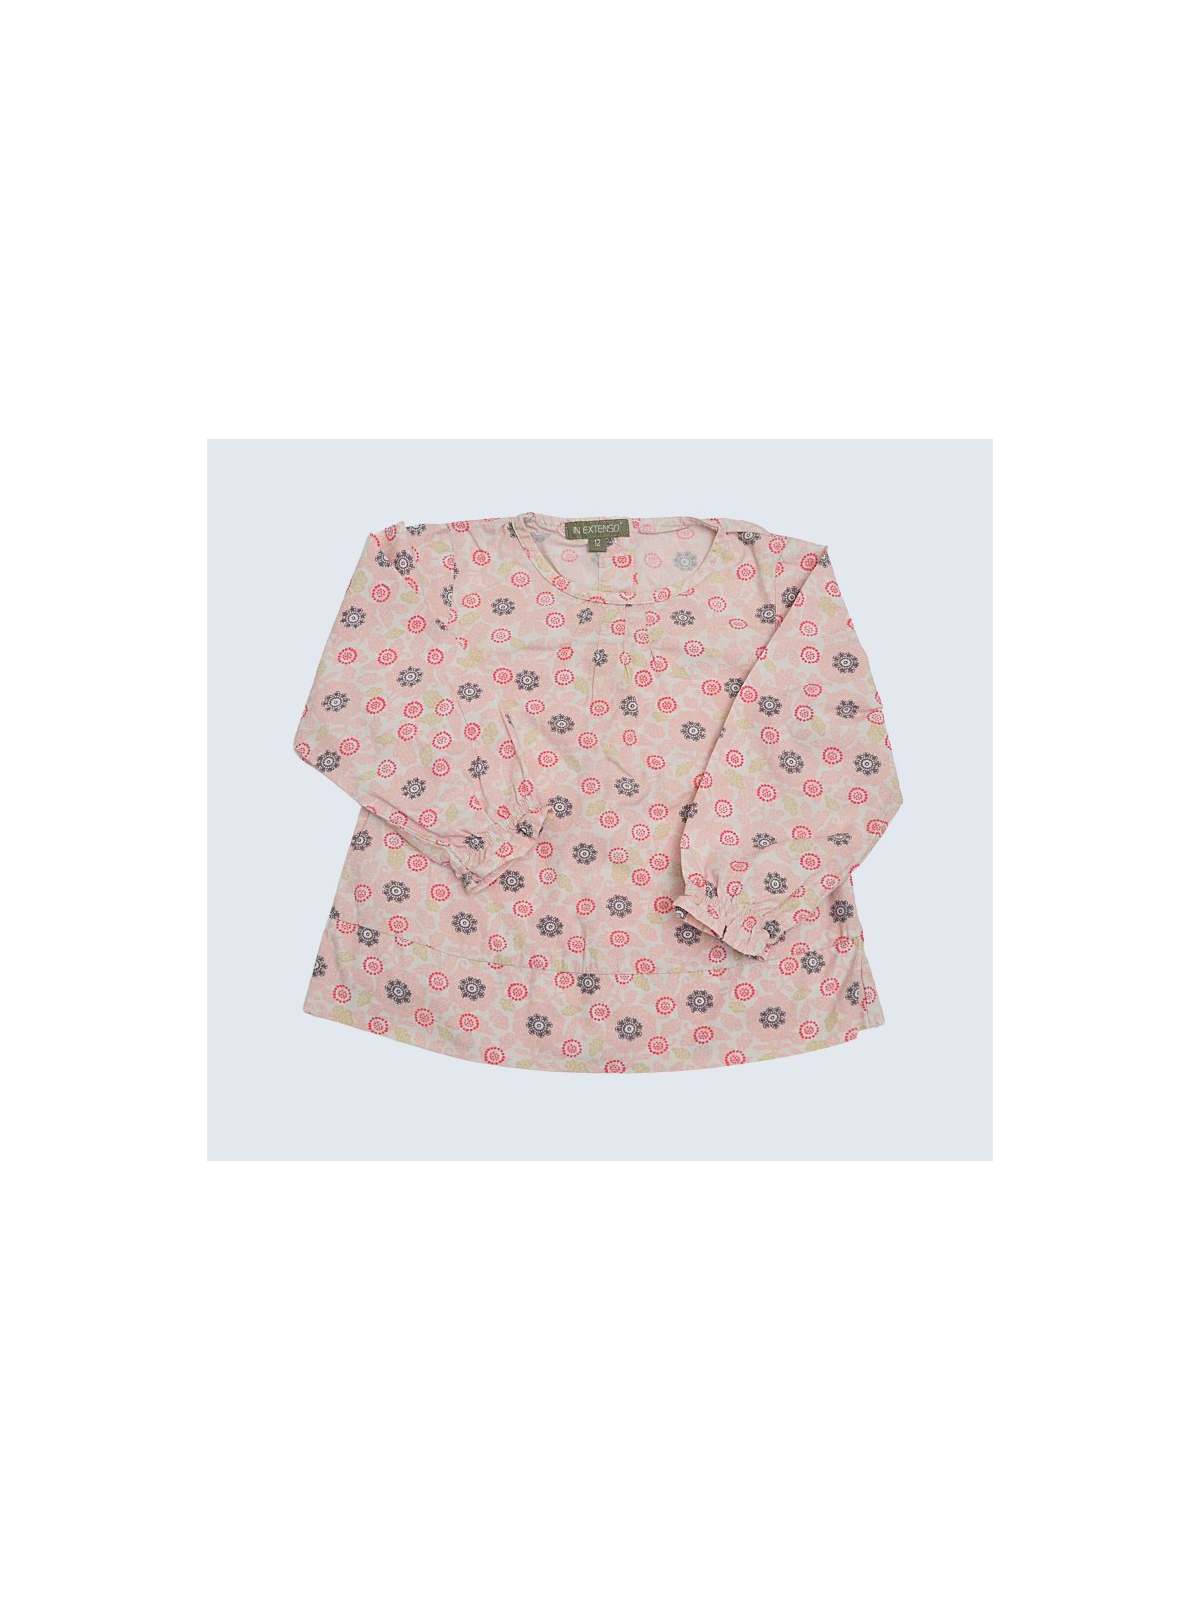 Blouse d'occasion In Extenso 12 Mois pour fille.